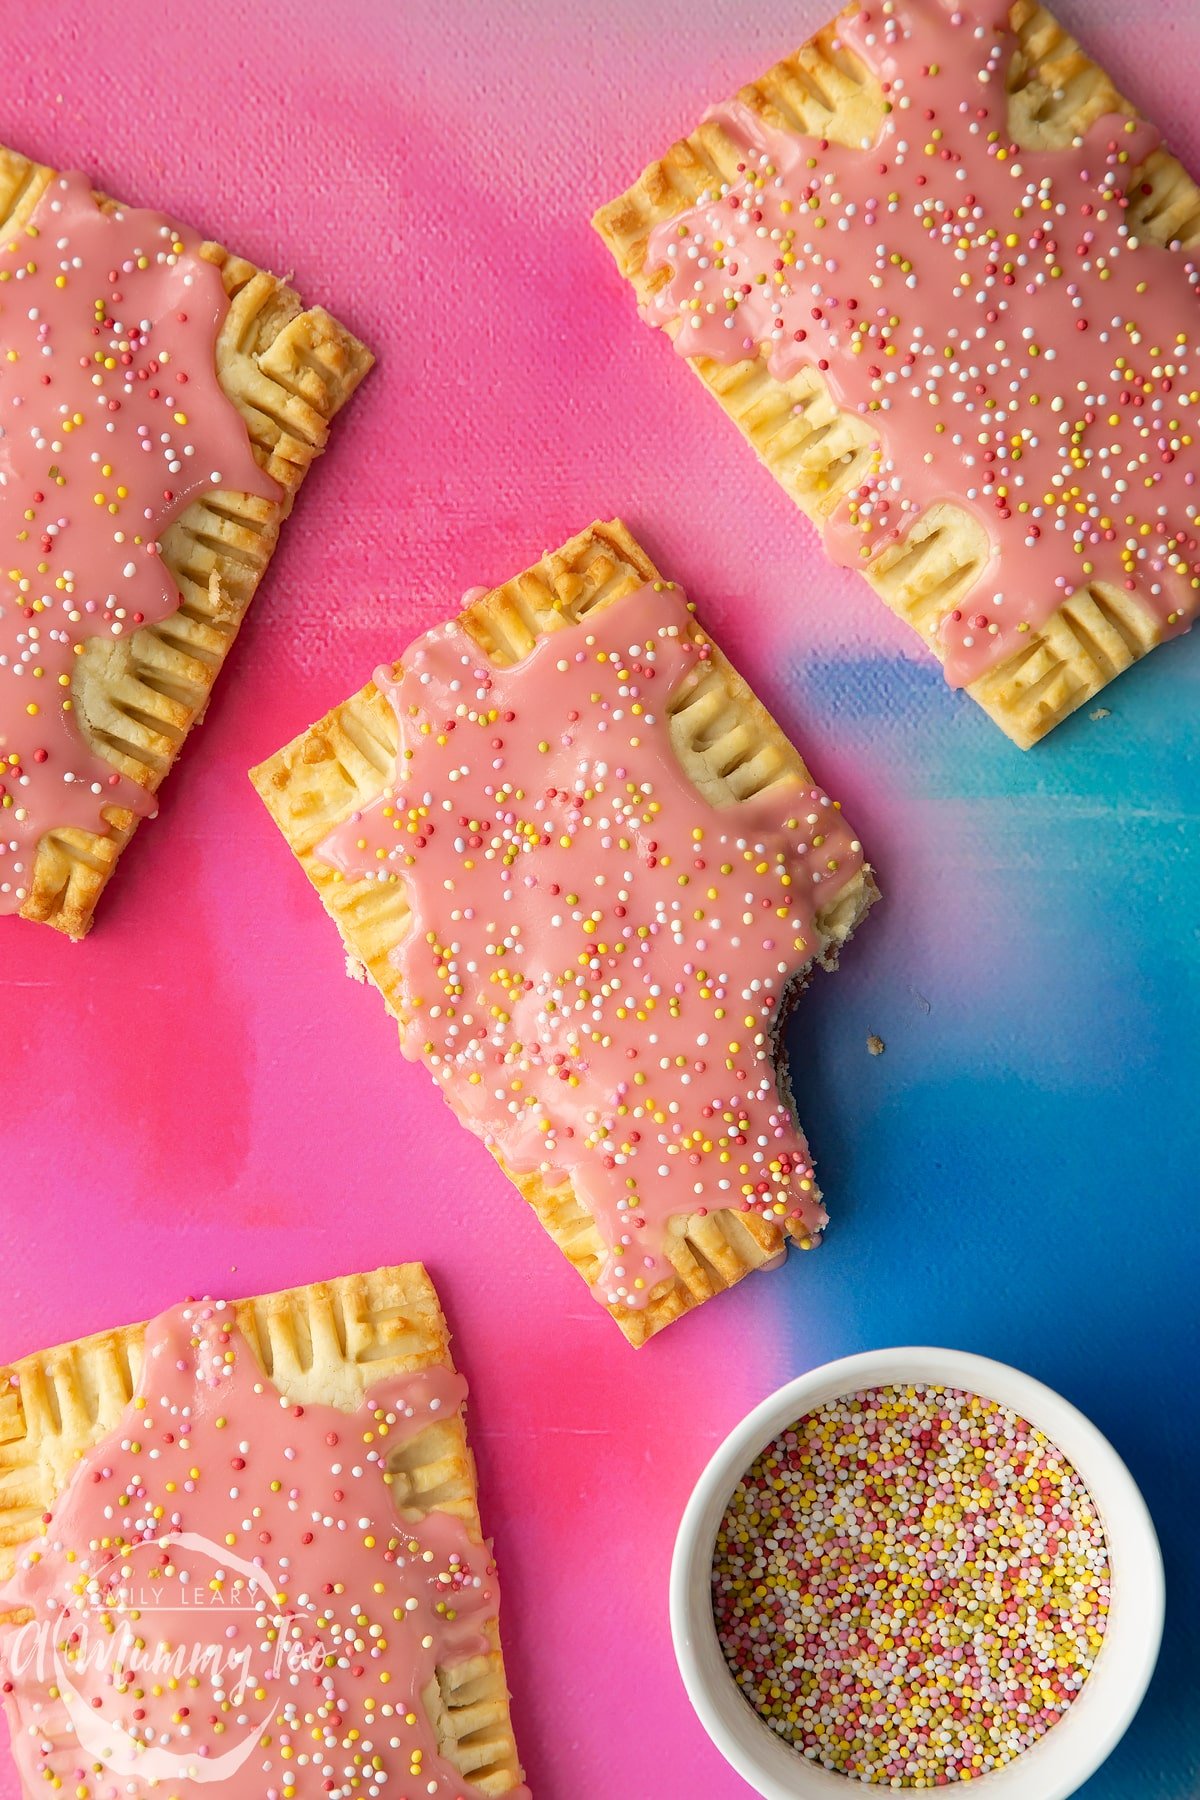 Gluten free pop tarts with pink icing and pastel sprinkles on a bright pink and blue backdrop. One has a bite out of the corner.